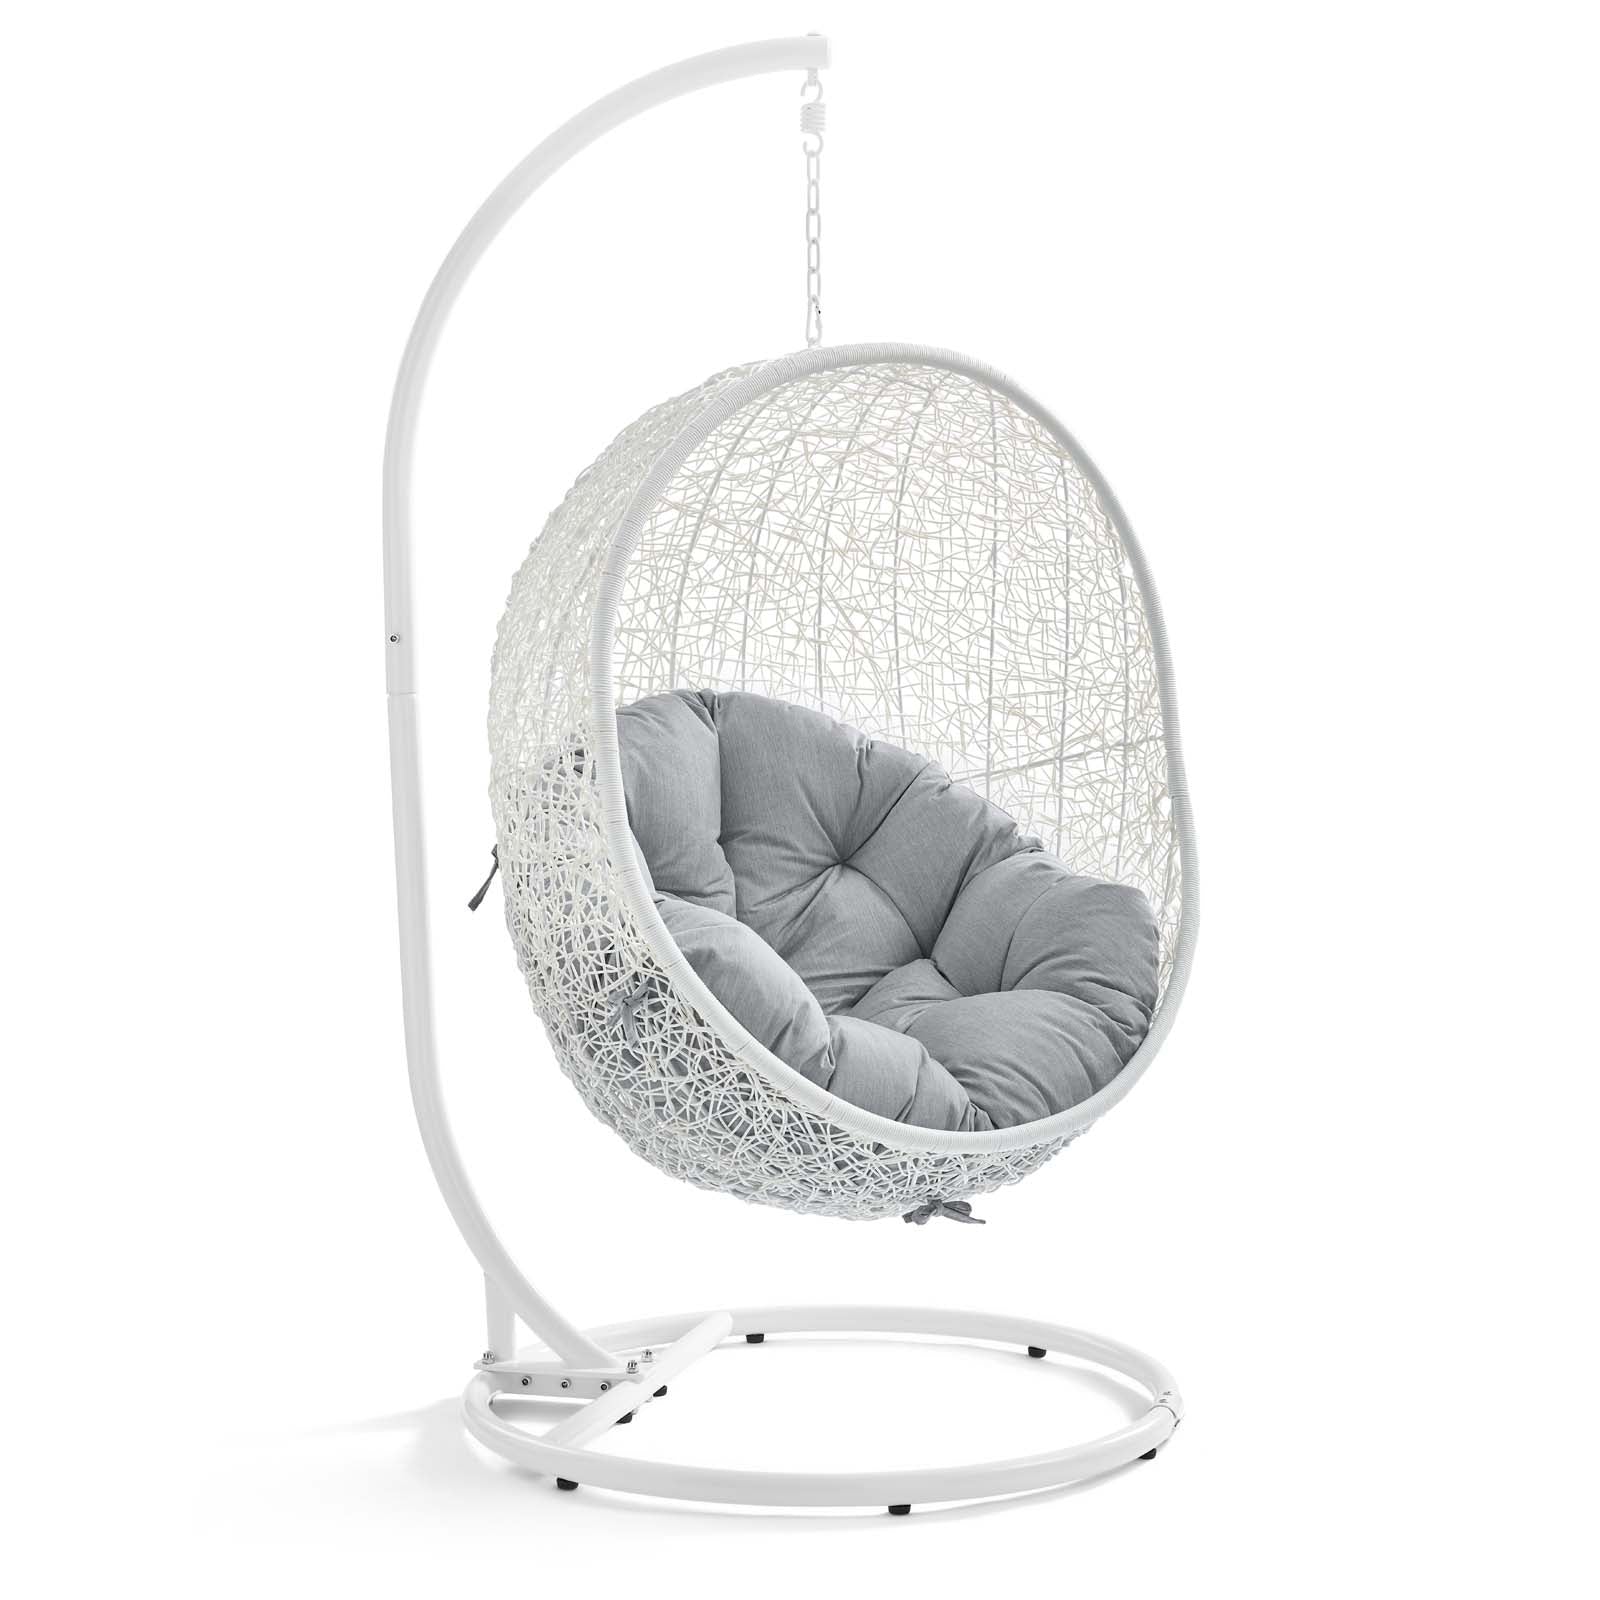 Modway Outdoor Swings - Hide Outdoor Patio Sunbrella Swing Chair With Stand White Gray